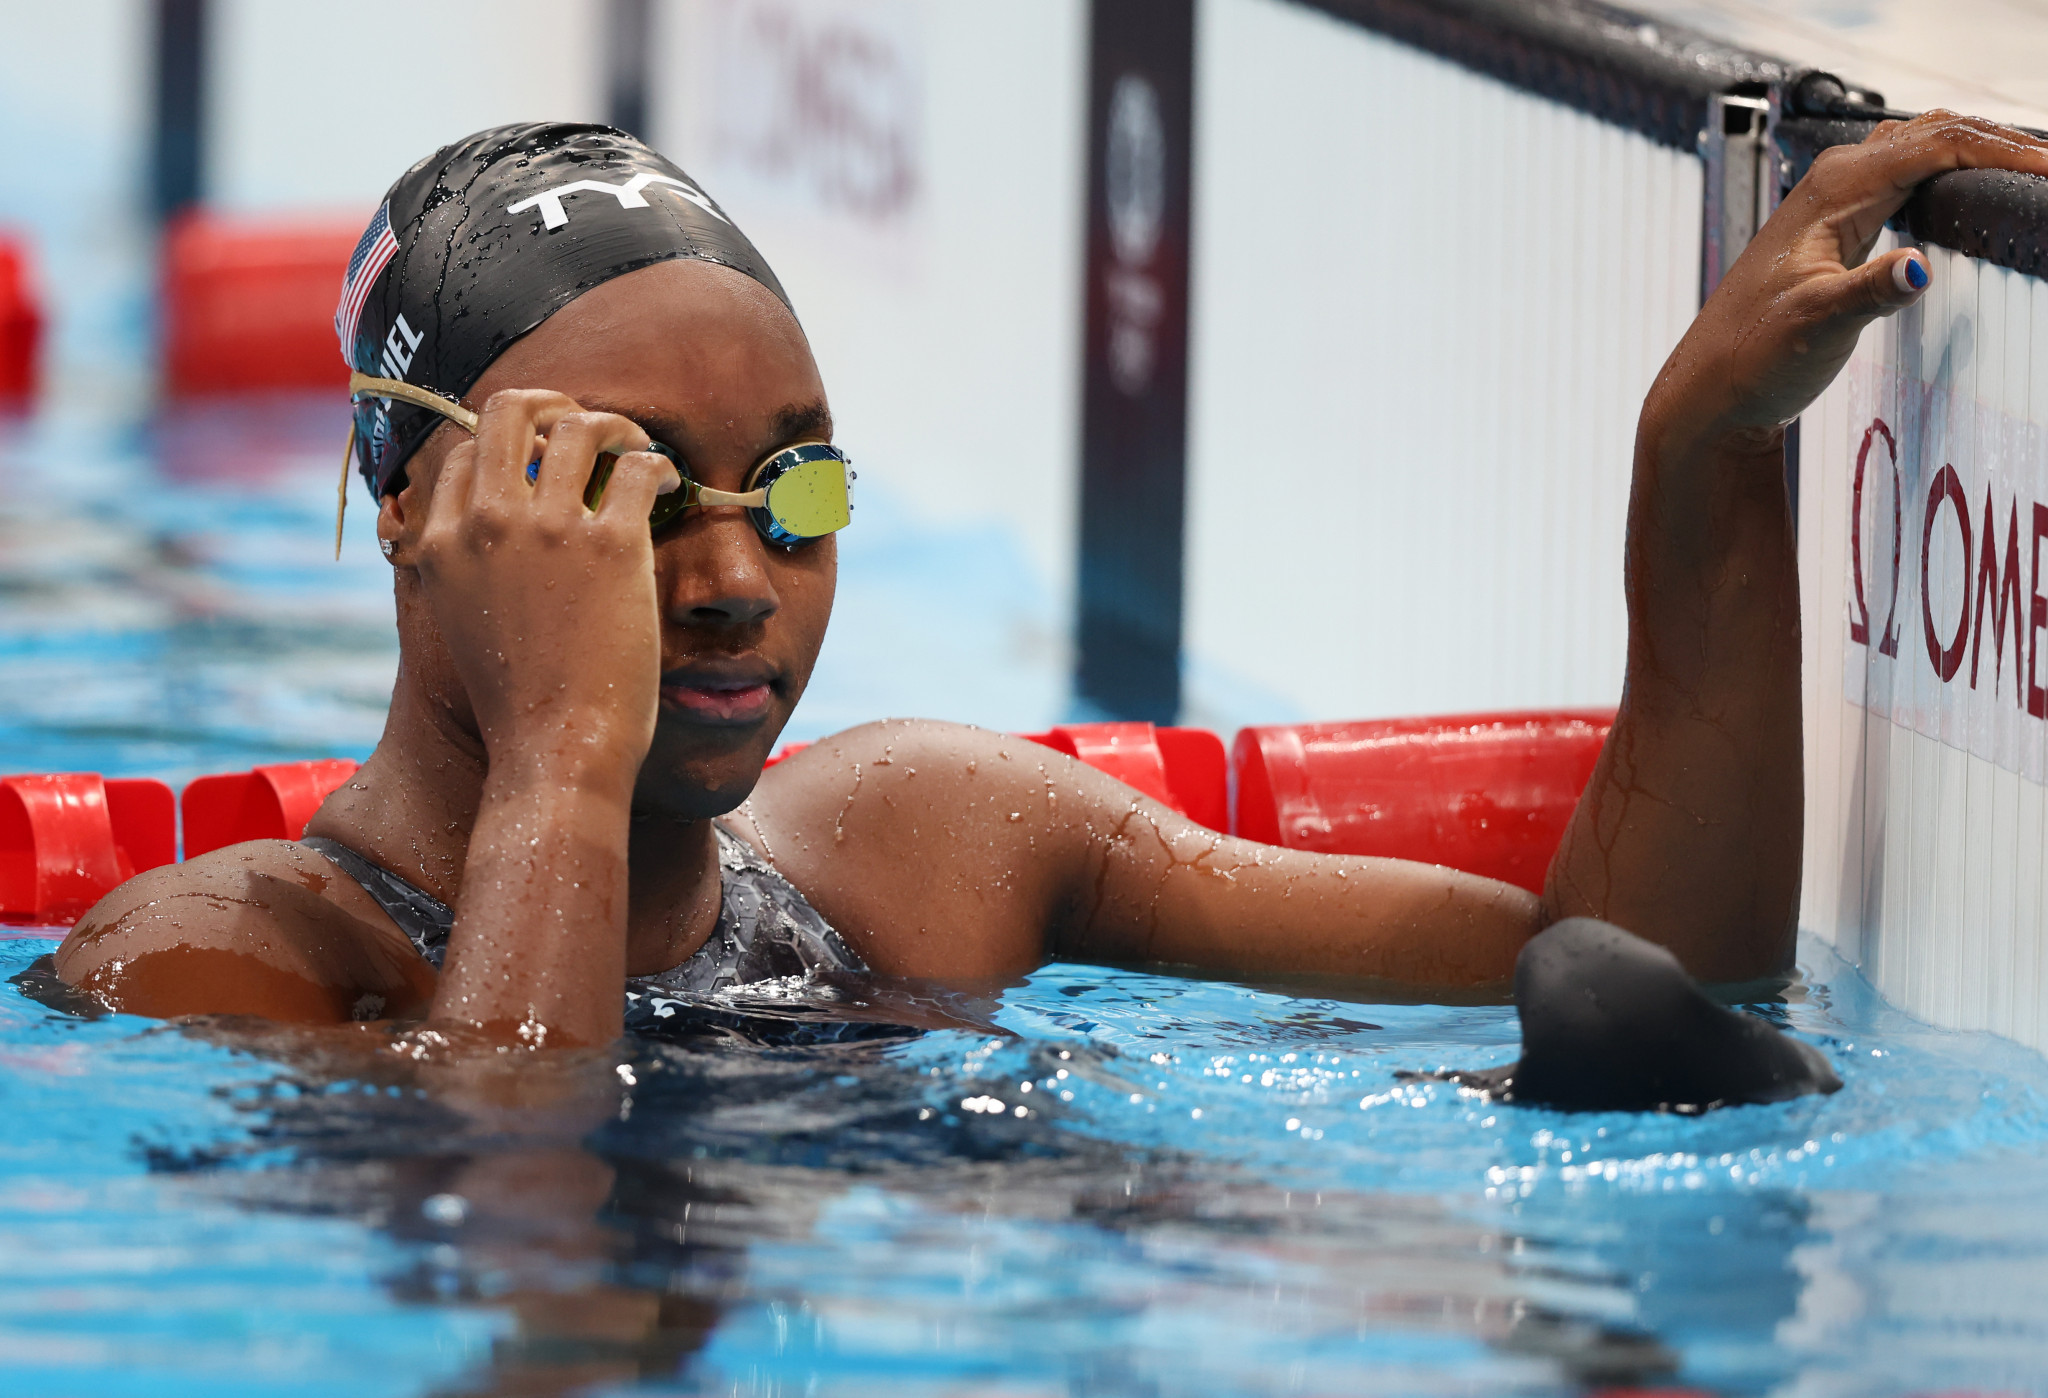 Black swimmers could benefit from the Soul Cap being approved by FINA ©Getty Images